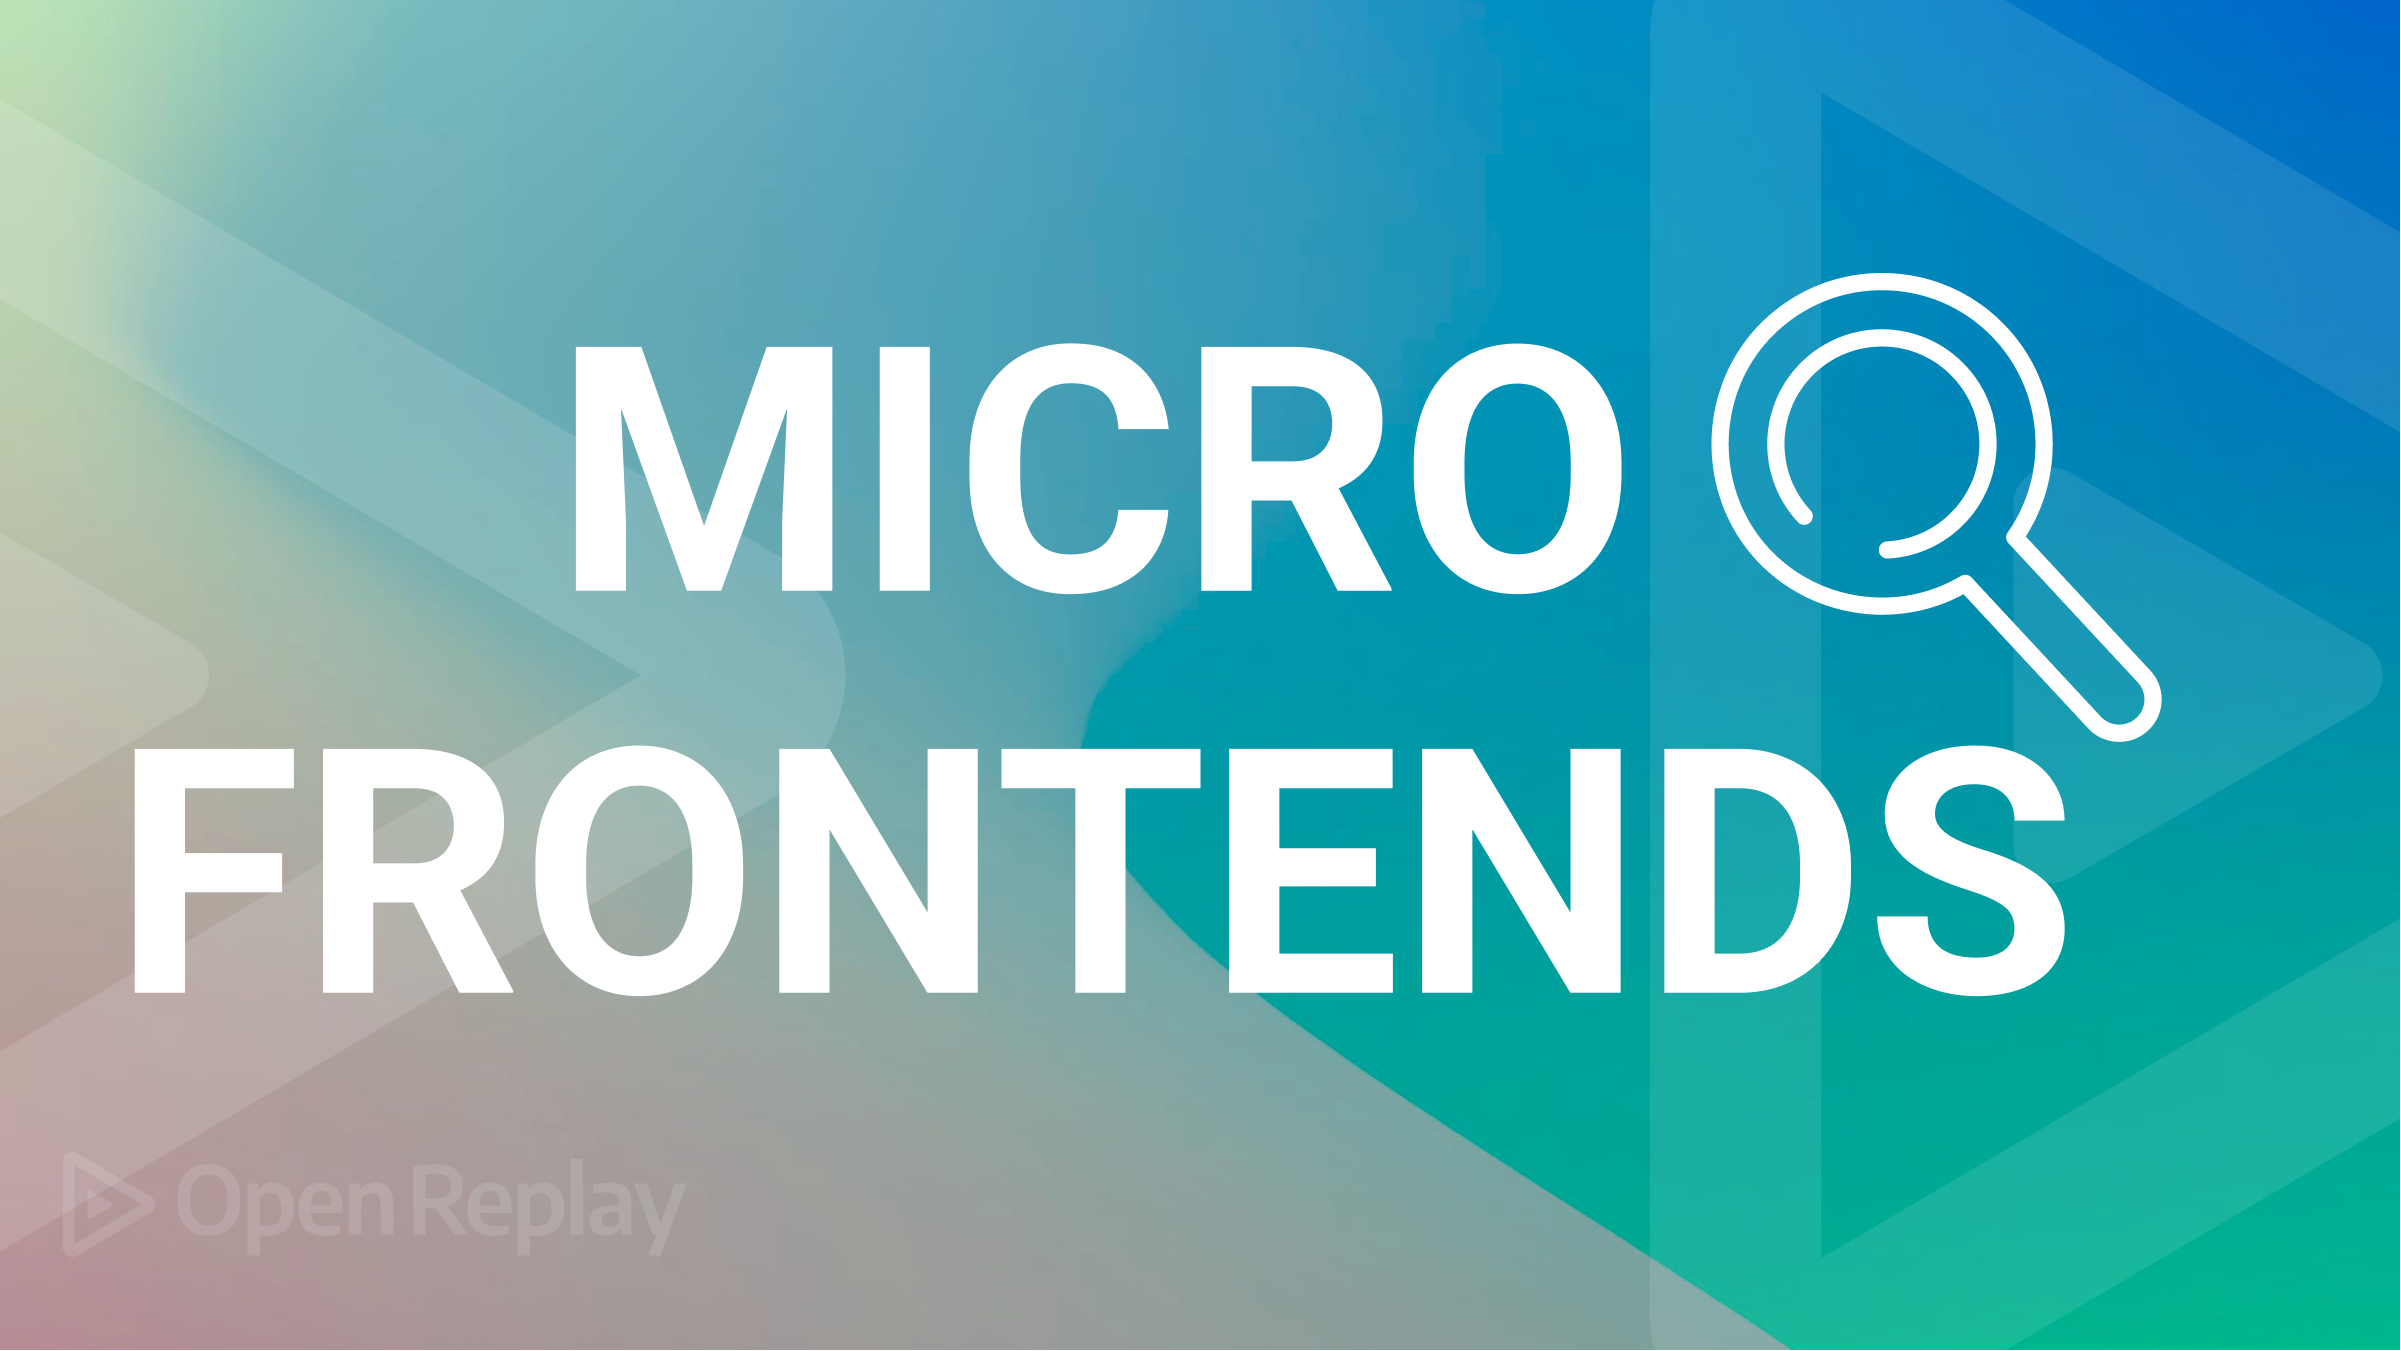 Common problems with Micro frontends and how to avoid them